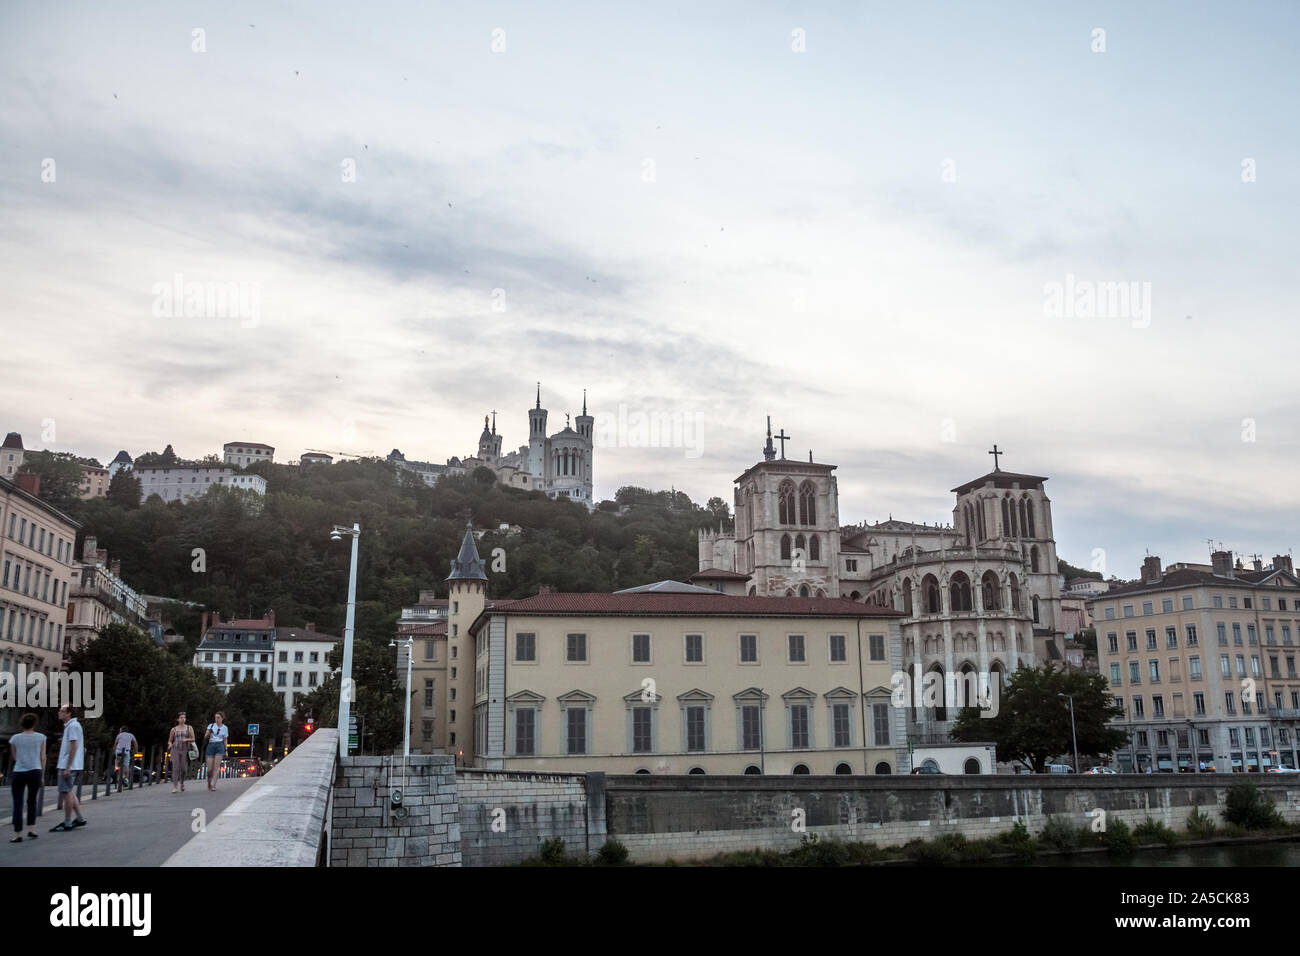 LYON, FRANCE - JULY 17, 2019: Basilique Notre Dame de Fourviere Basilica church and Cathedrale Saint Jean Baptiste in Lyon, France, surrounded by hist Stock Photo